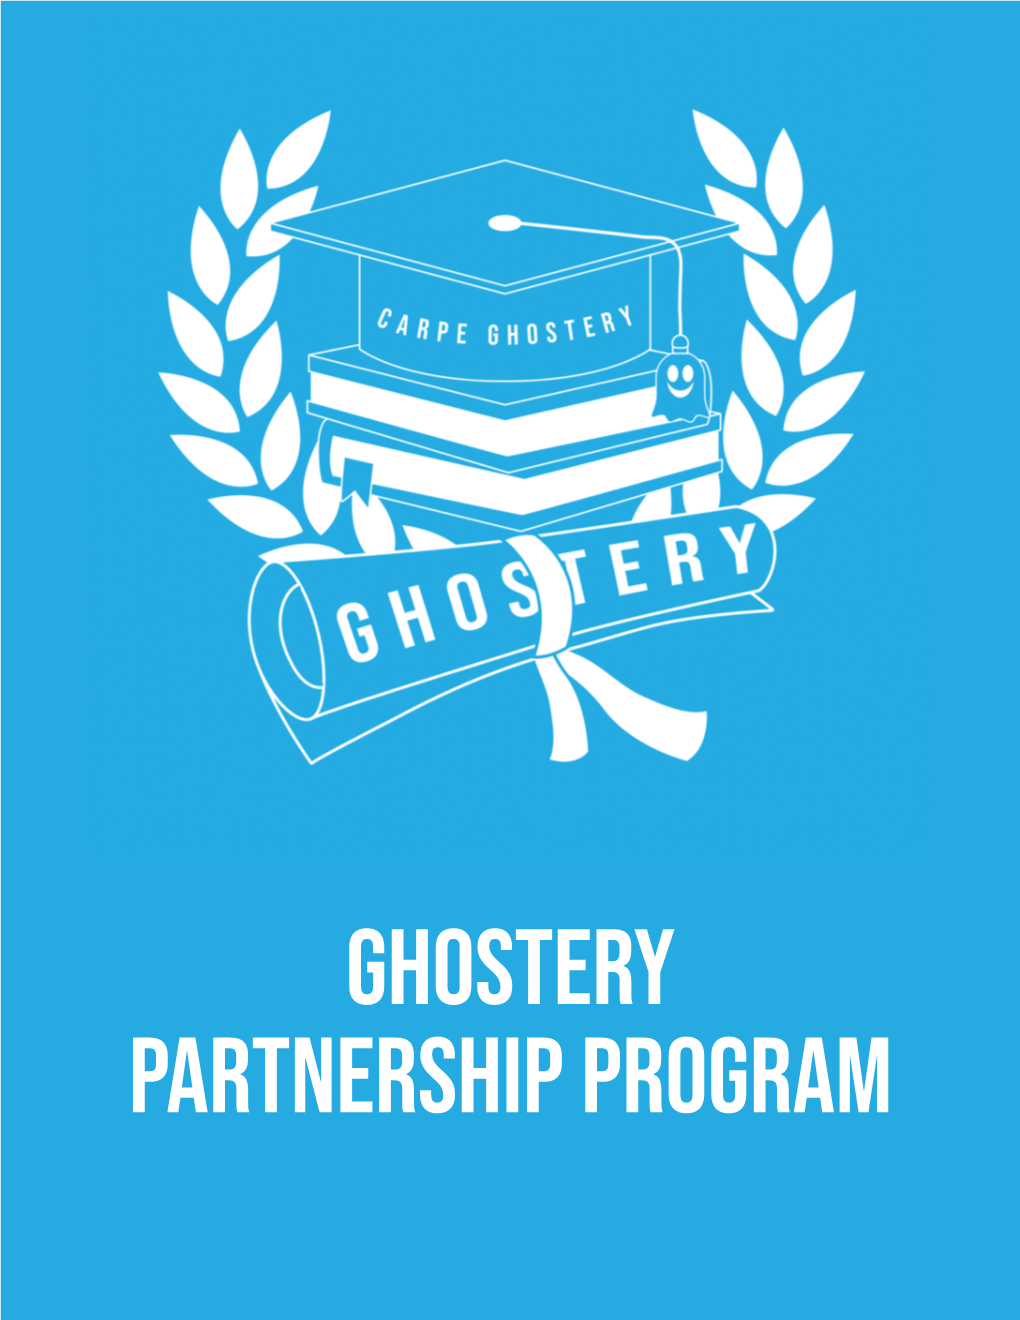 Partnership Program What Is Ghostery? Ghostery, Inc